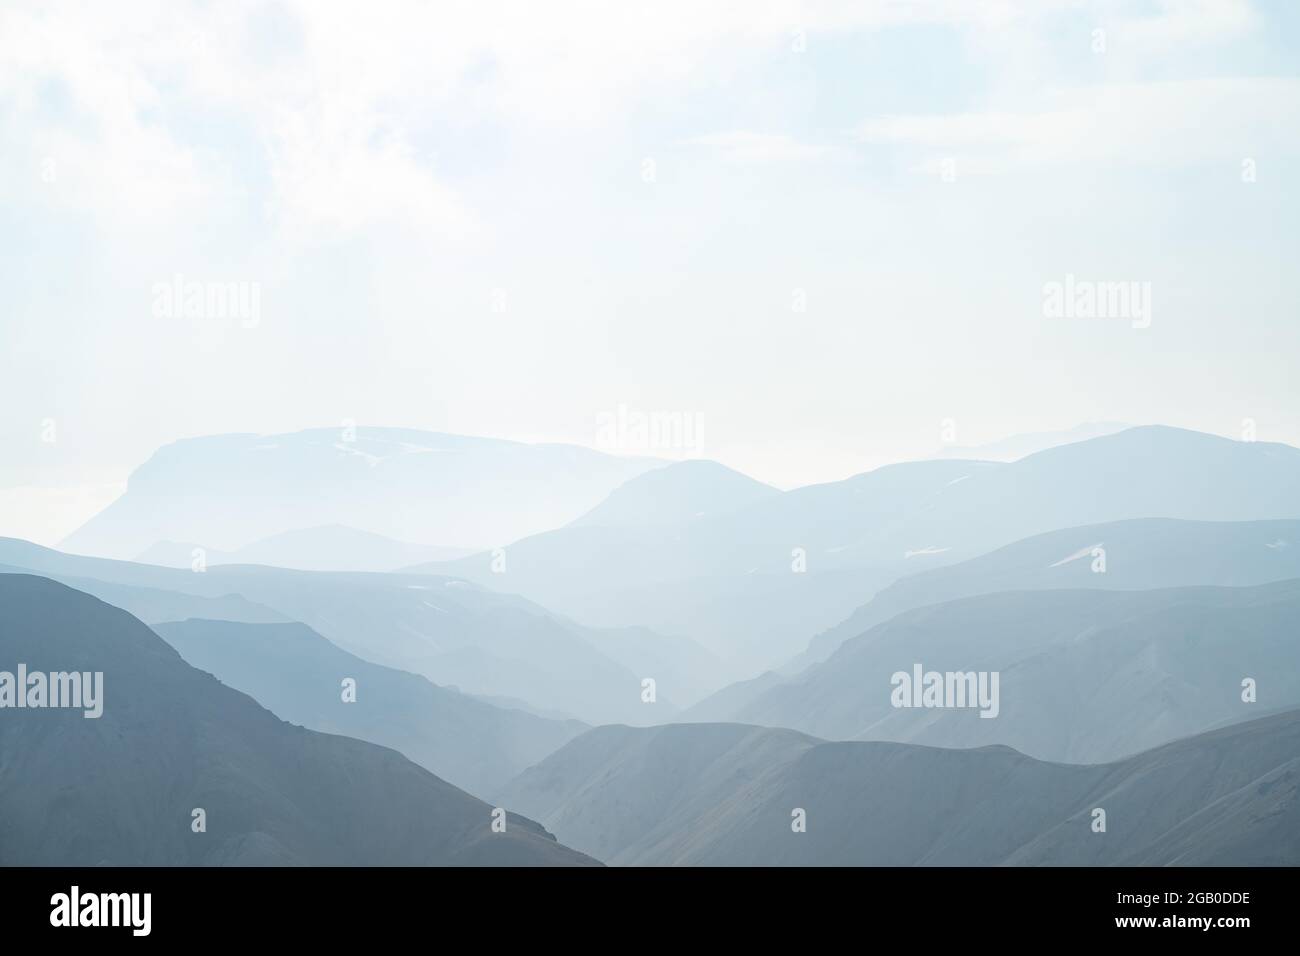 Clean minimalistic background of mountain layers Stock Photo